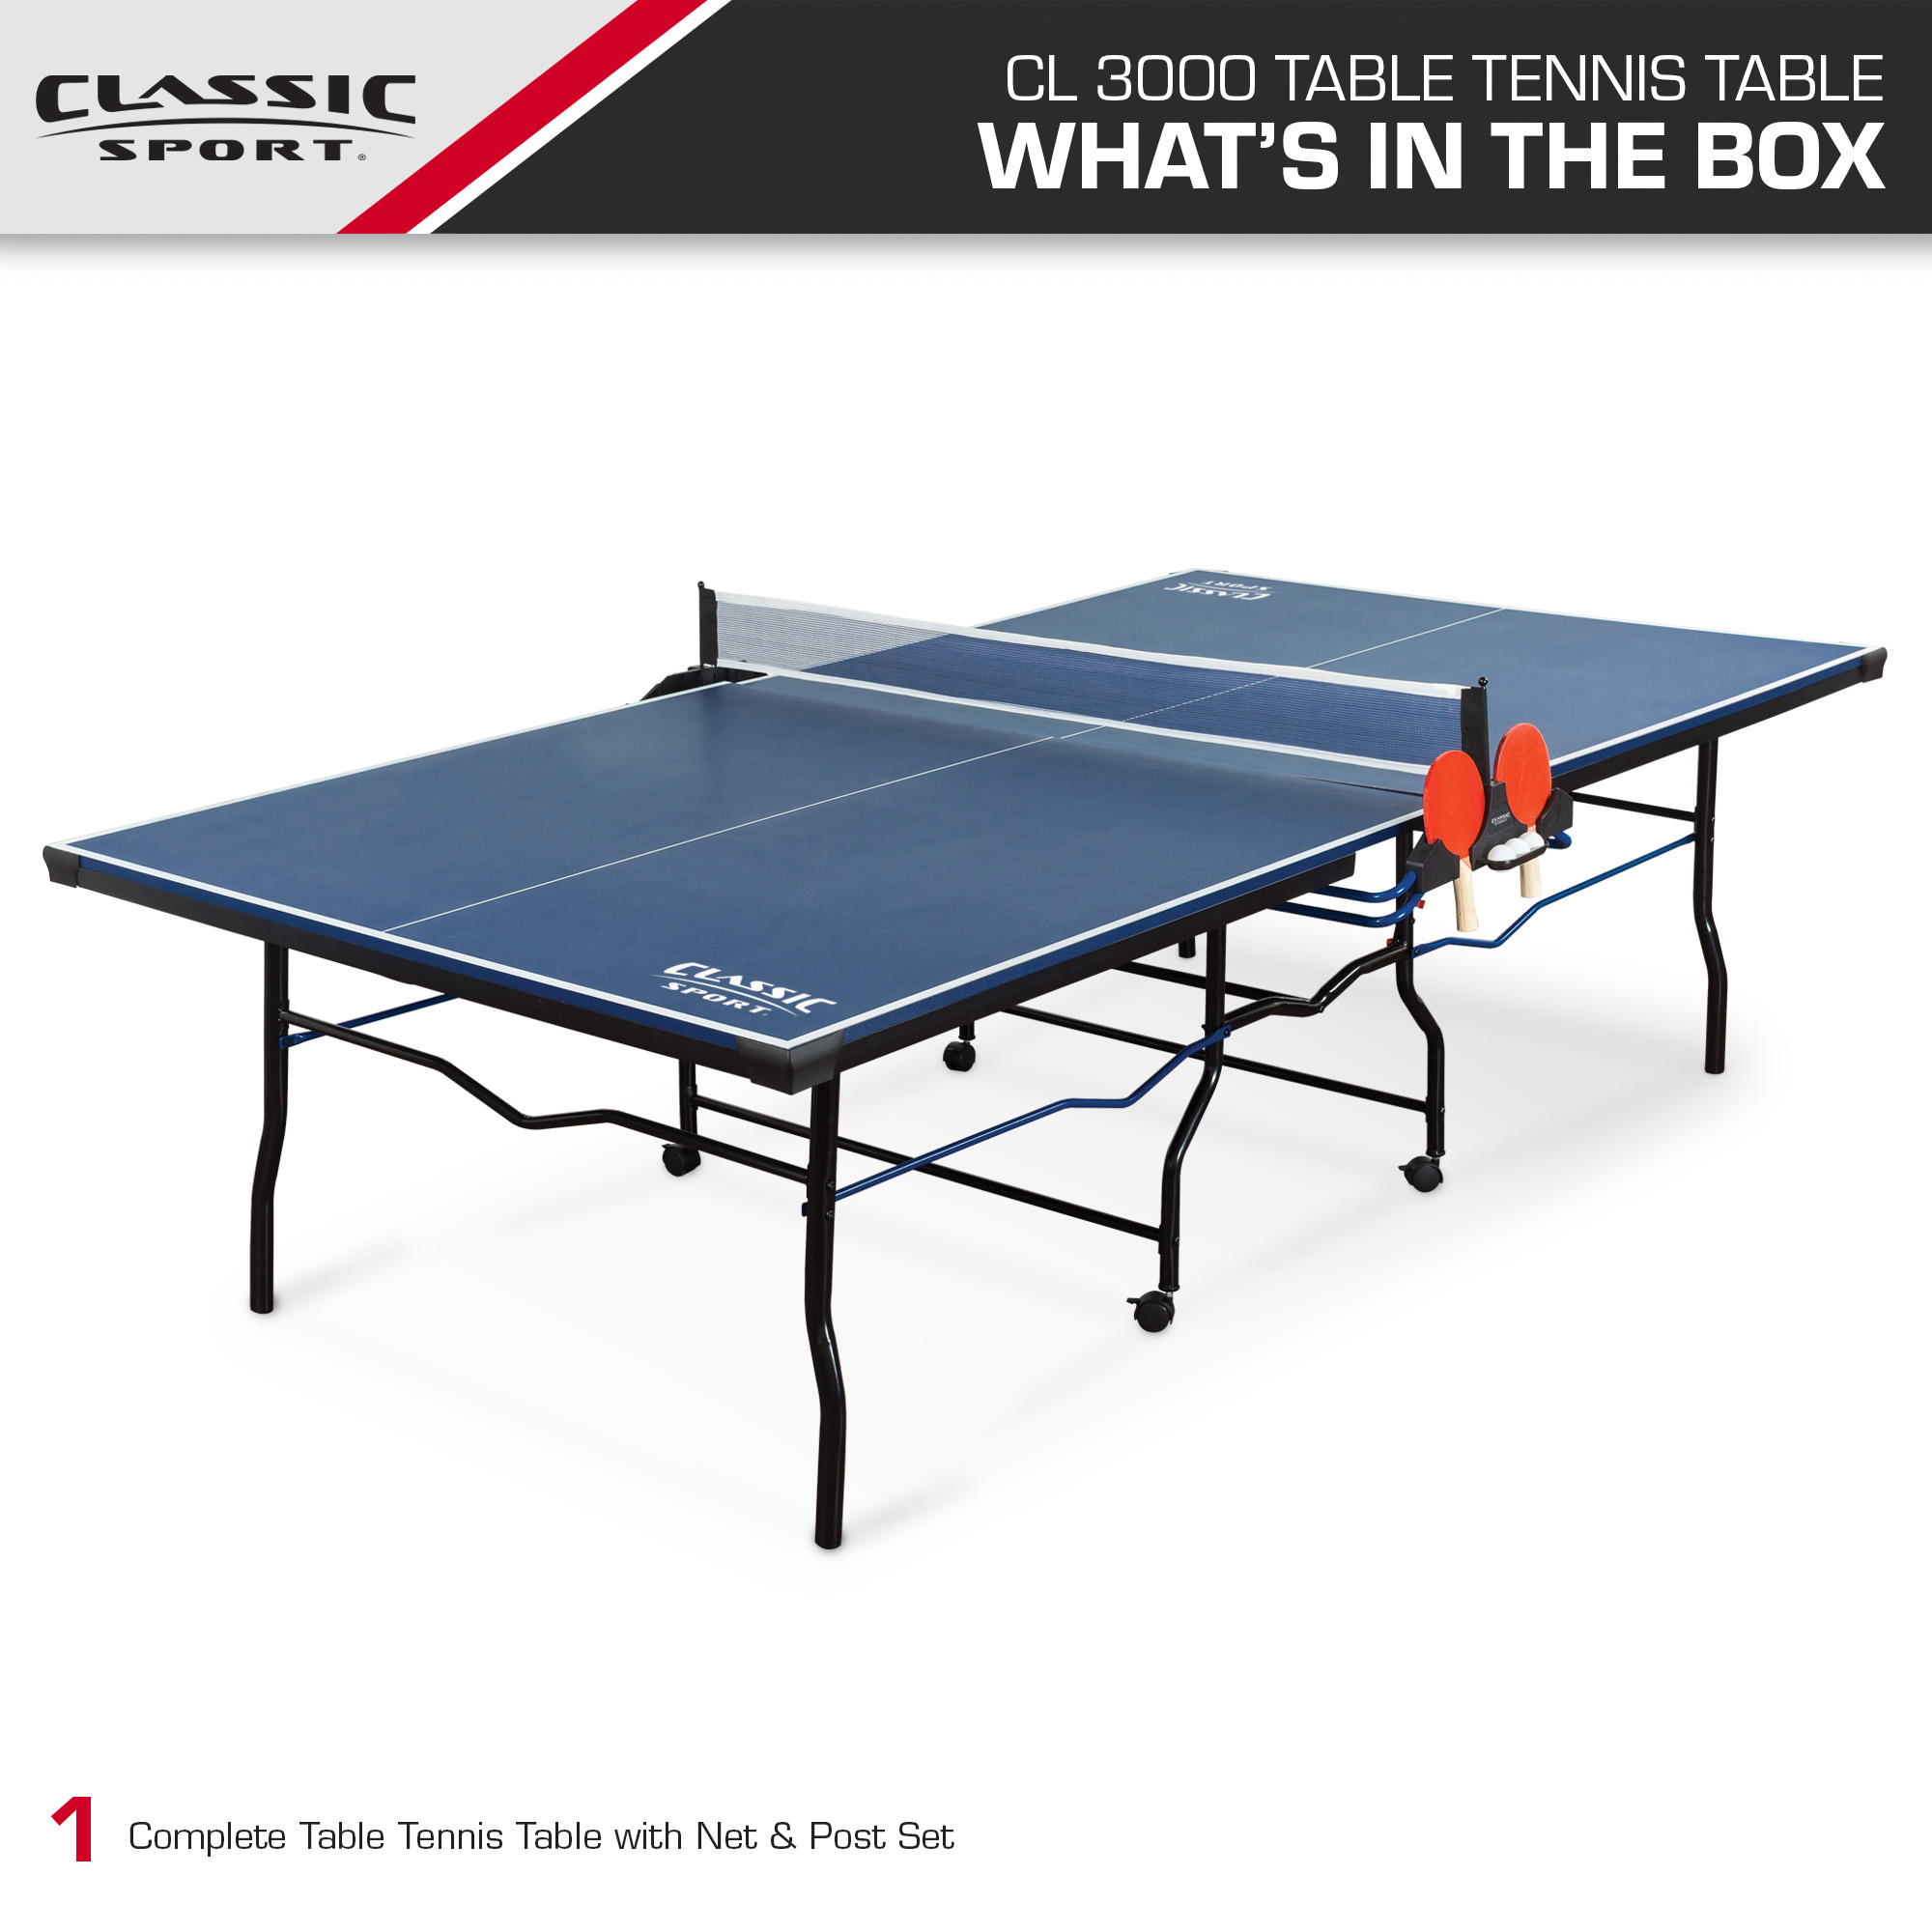 EastPoint Sports Classic Sport 15mm Table Tennis Table, Tournament Size 9 ft. x 5 ft. for Indoor Game Room - image 2 of 10